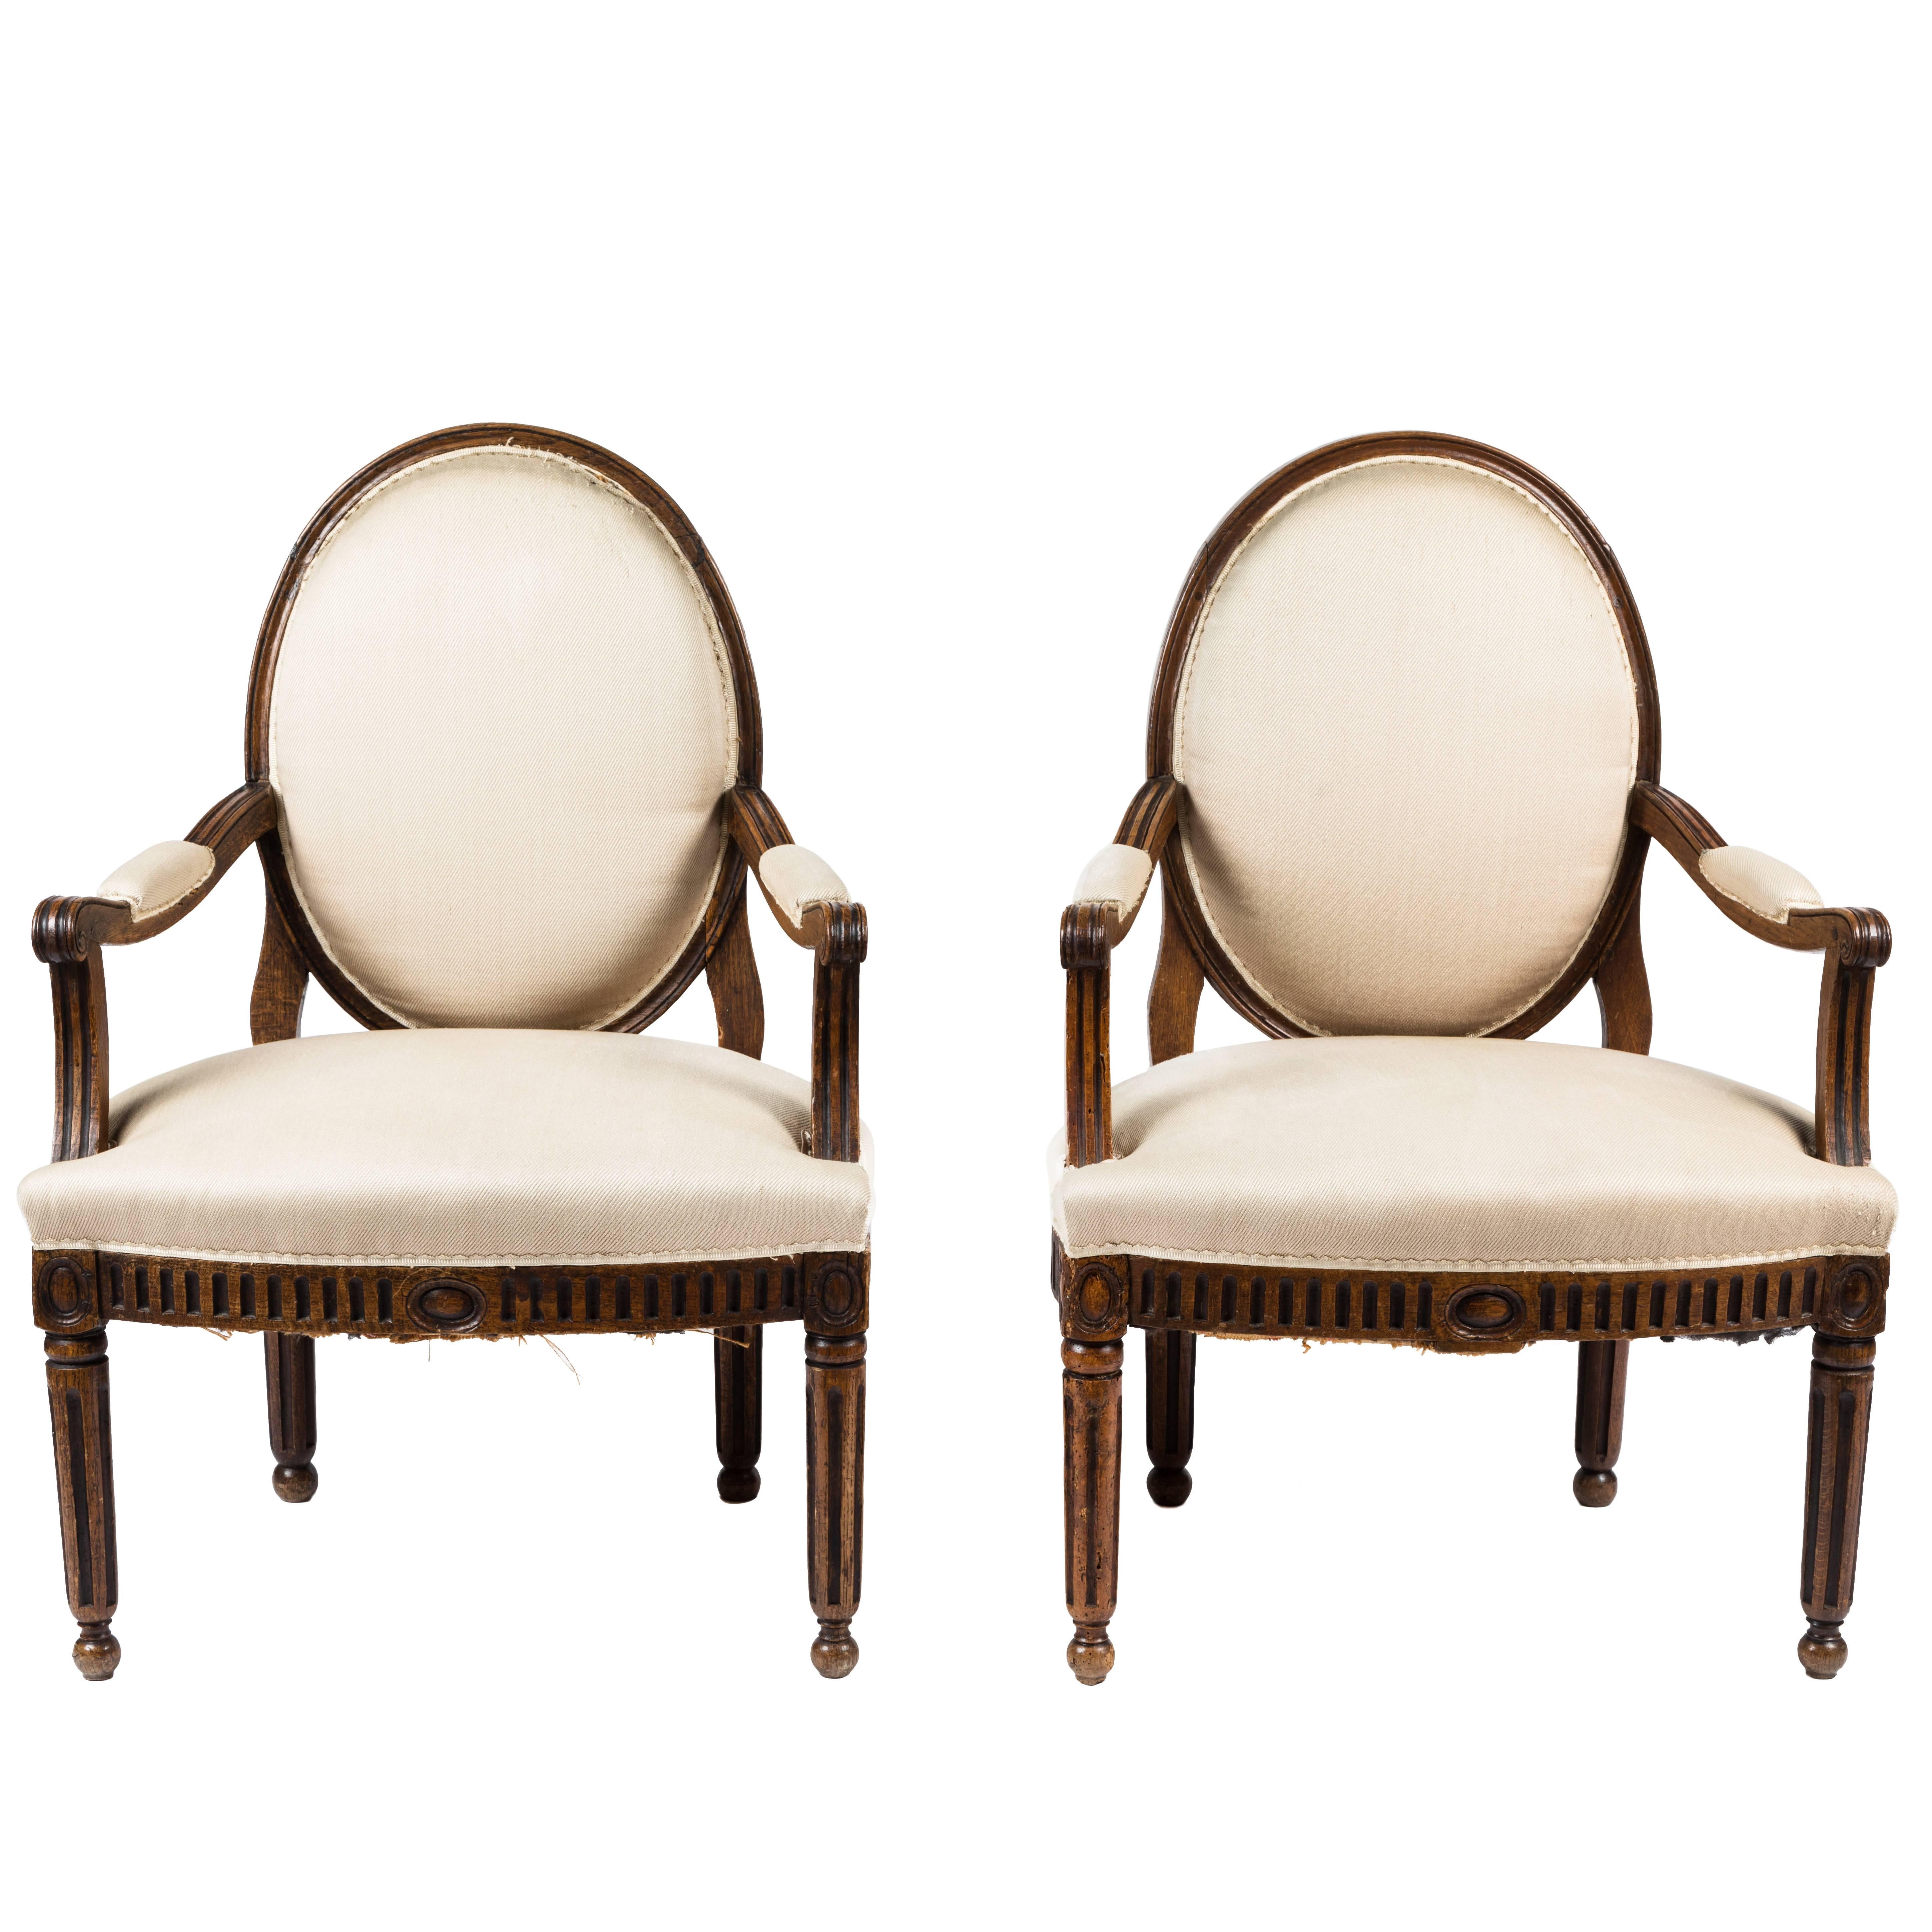 Pair of Antique Italian Neoclassical Style Armchairs